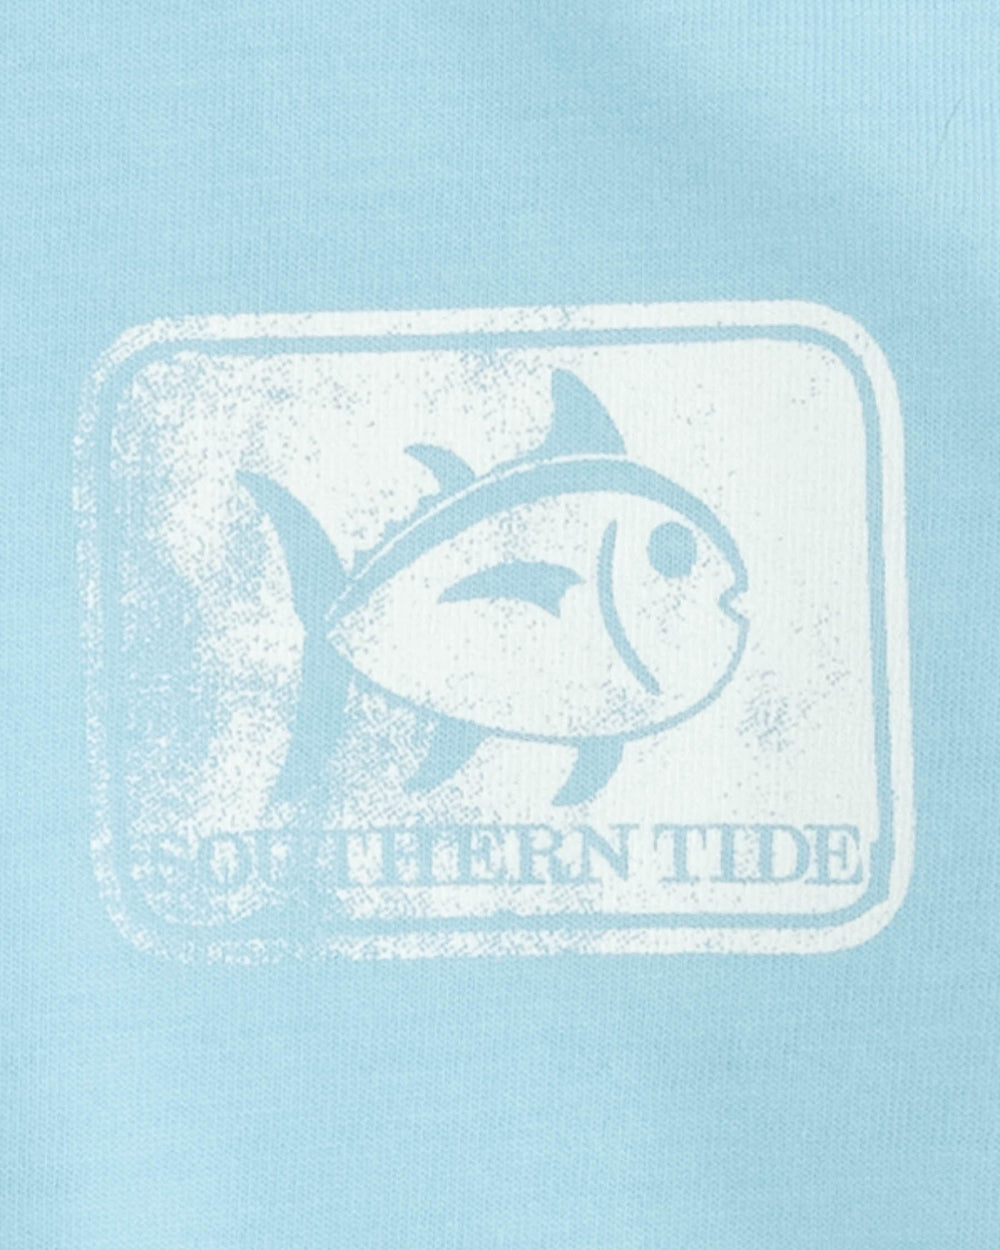 The detail view of the Southern Tide Youth Skipjack Reef T-Shirt by Southern Tide - Rain Water